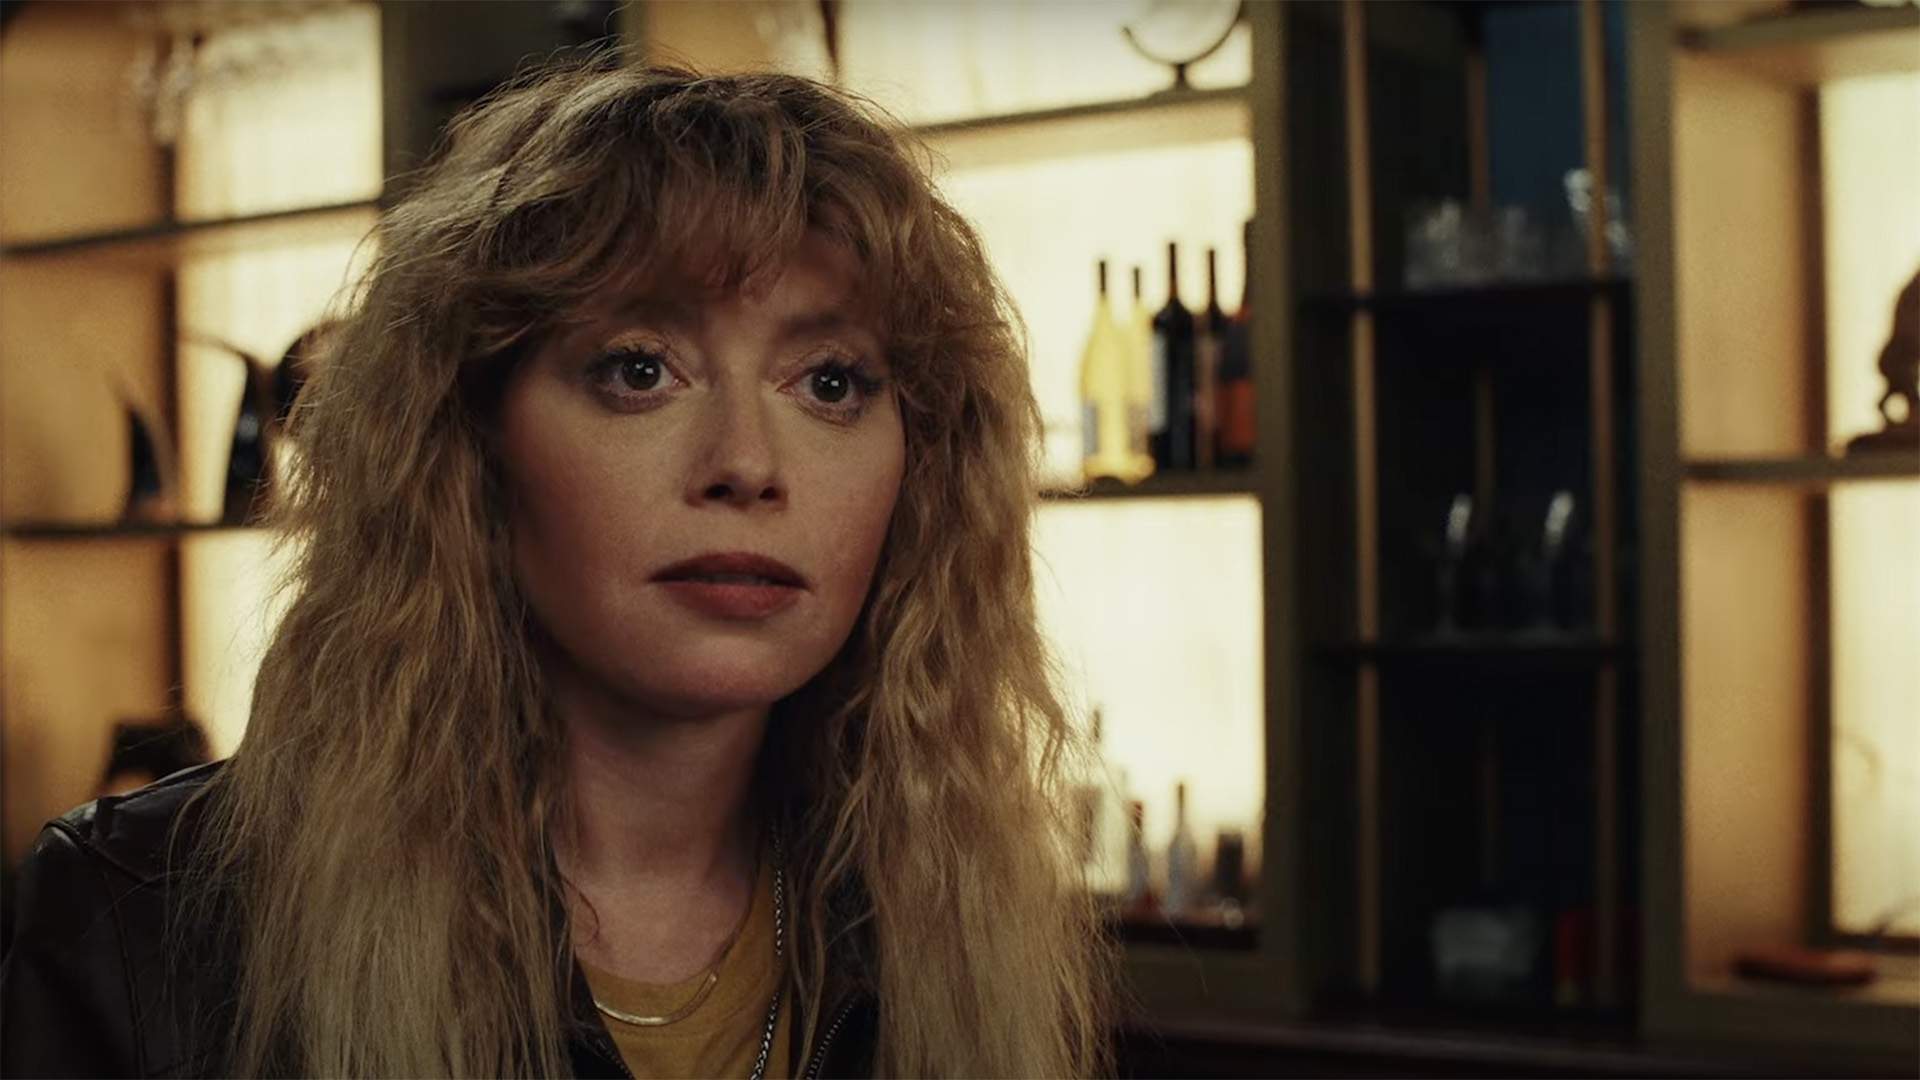 Natasha Lyonne Turns Detective in 'Poker Face', the New Mystery Series From the Director of 'Knives Out'